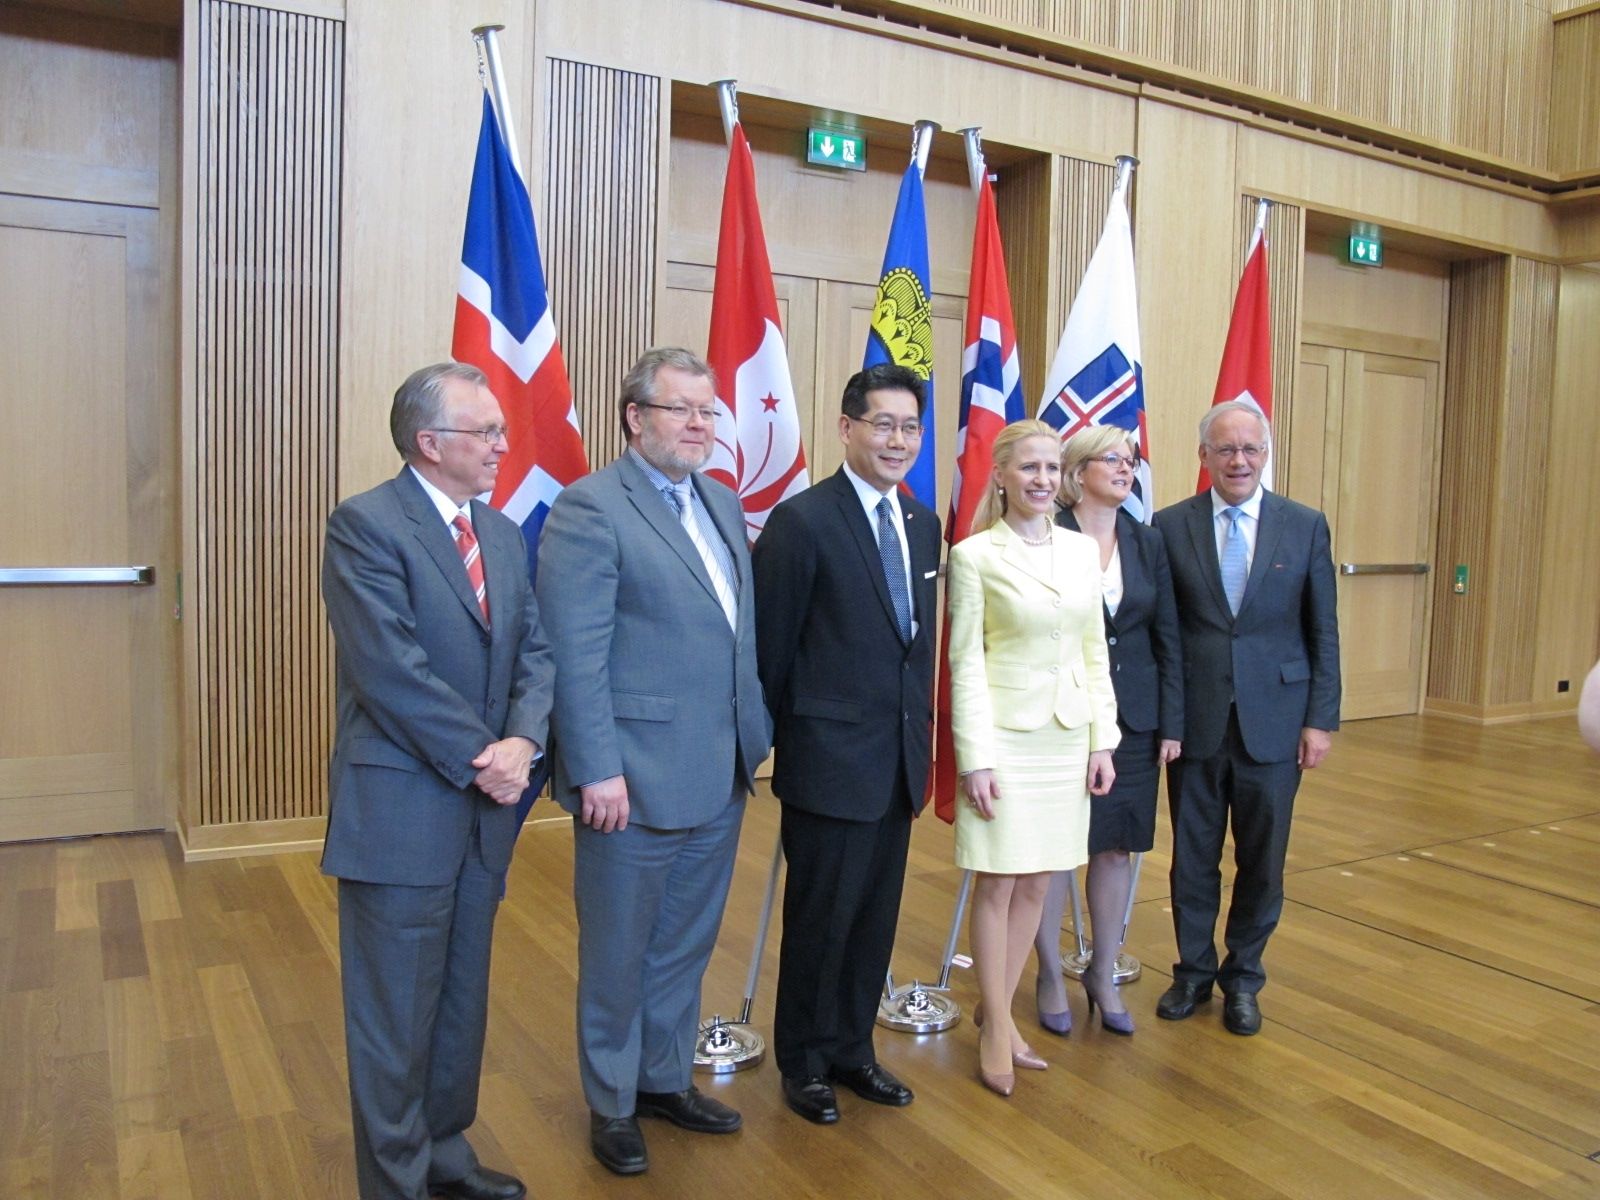 Group photo of Mr So and other signatories, including Minister for Foreign Affairs and External Trade of Iceland, Mr Ossur Skarphedinsson (second left) ; Minister of Foreign Affairs of Liechtenstein, Dr Aurelia Frick (third right) ; State Secretary of the Ministry of Trade and Industry of Norway, Ms Rikke Lind (second right) ; and Federal Councillor and Head of the Federal Department of Economic Affairs of Switzerland, Mr Johann N Schneider-Ammann (right). 